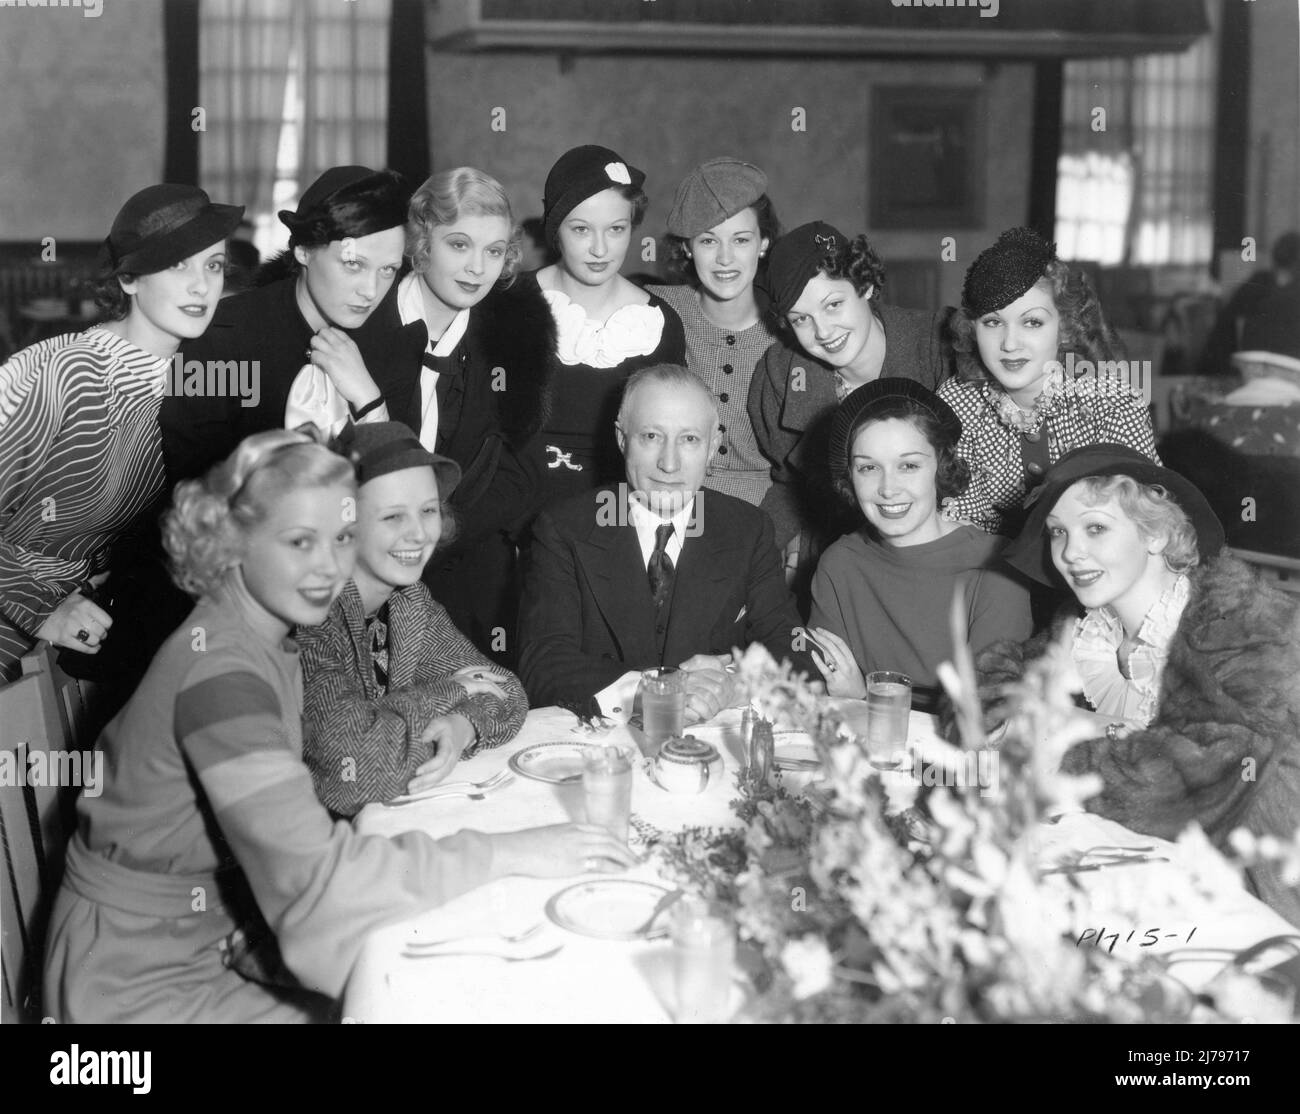 Founder of Paramount Pictures ADOLPH ZUKOR at an early 1934 luncheon at Paramount Studios in his honour surrounded by young contract actresses with at table from left TOBY WING, CHARLOTTE HENRY, GAIL PATRICK and IDA LUPINO and standing from left GWENLLIAN GILL, BARBARA FRITCHIE, DOROTHY DELL, EVELYN VENABLE, ELIZABETH YOUNG, CLARA LOU (later ANN) SHERIDAN and GRACE BRADLEY Stock Photo